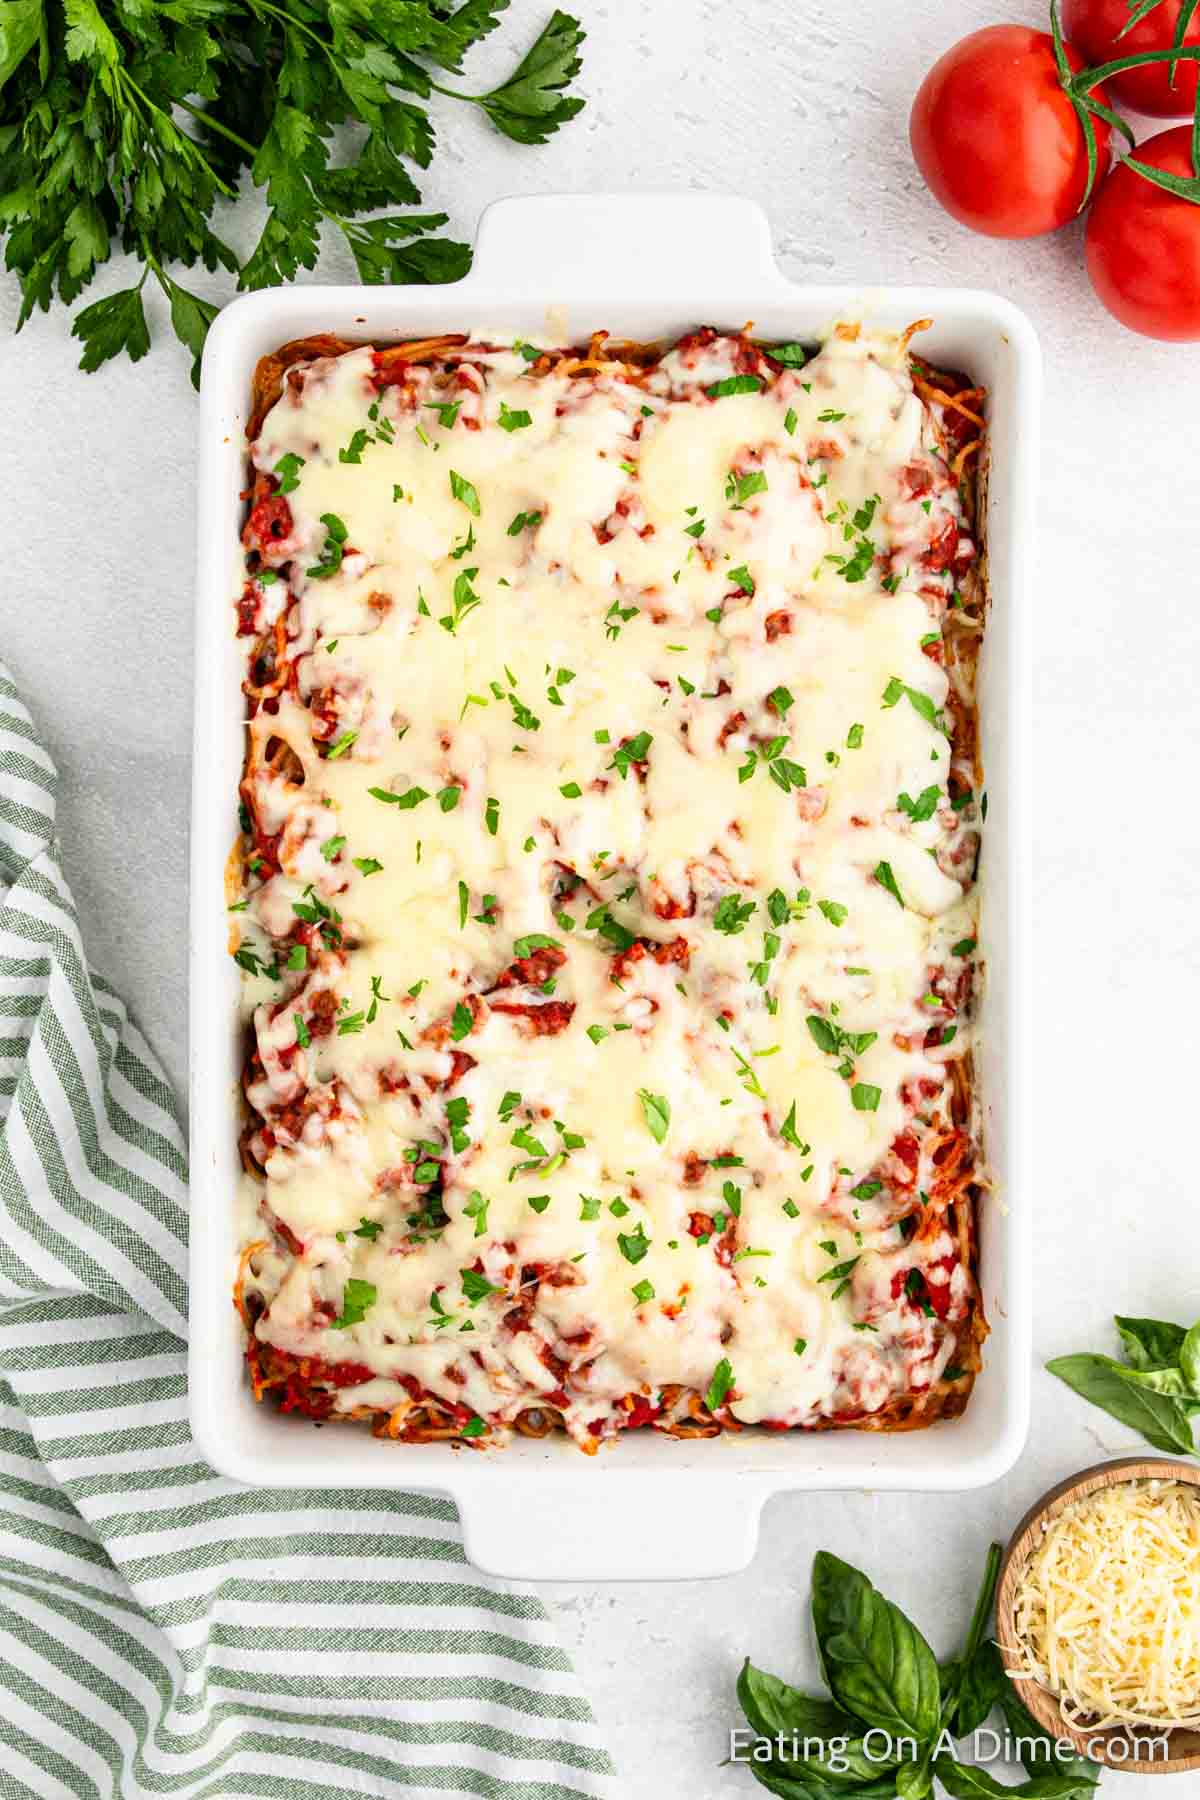 A white rectangular baking dish filled with a freshly baked million dollar spaghetti casserole topped with melted cheese and chopped herbs. Surrounding the dish are sprigs of parsley, whole tomatoes, a dish of shredded cheese, and a green striped kitchen towel.